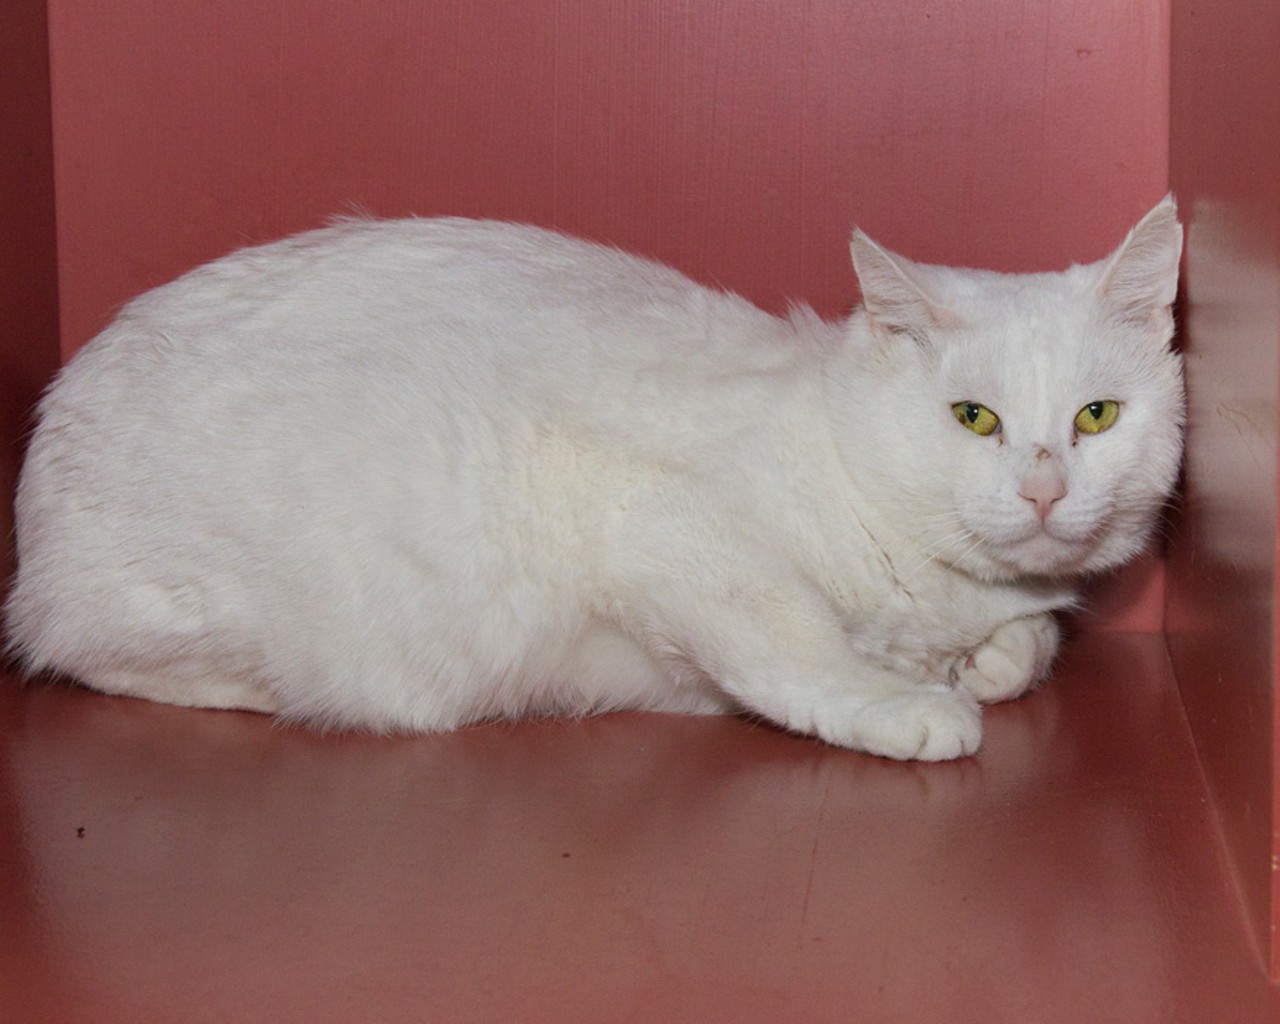  NAME: Nieve
GENDER: Male
BREED: Domestic short hair
AGE: 5 years, 1 month
WEIGHT: 13 pounds
SPECIAL CONSIDERATIONS: May not be a good fit for children
REASON I CAME TO MHS: Owner surrender
LOCATION: Berman Center for Animal Care in Westland
ID NUMBER: 859725